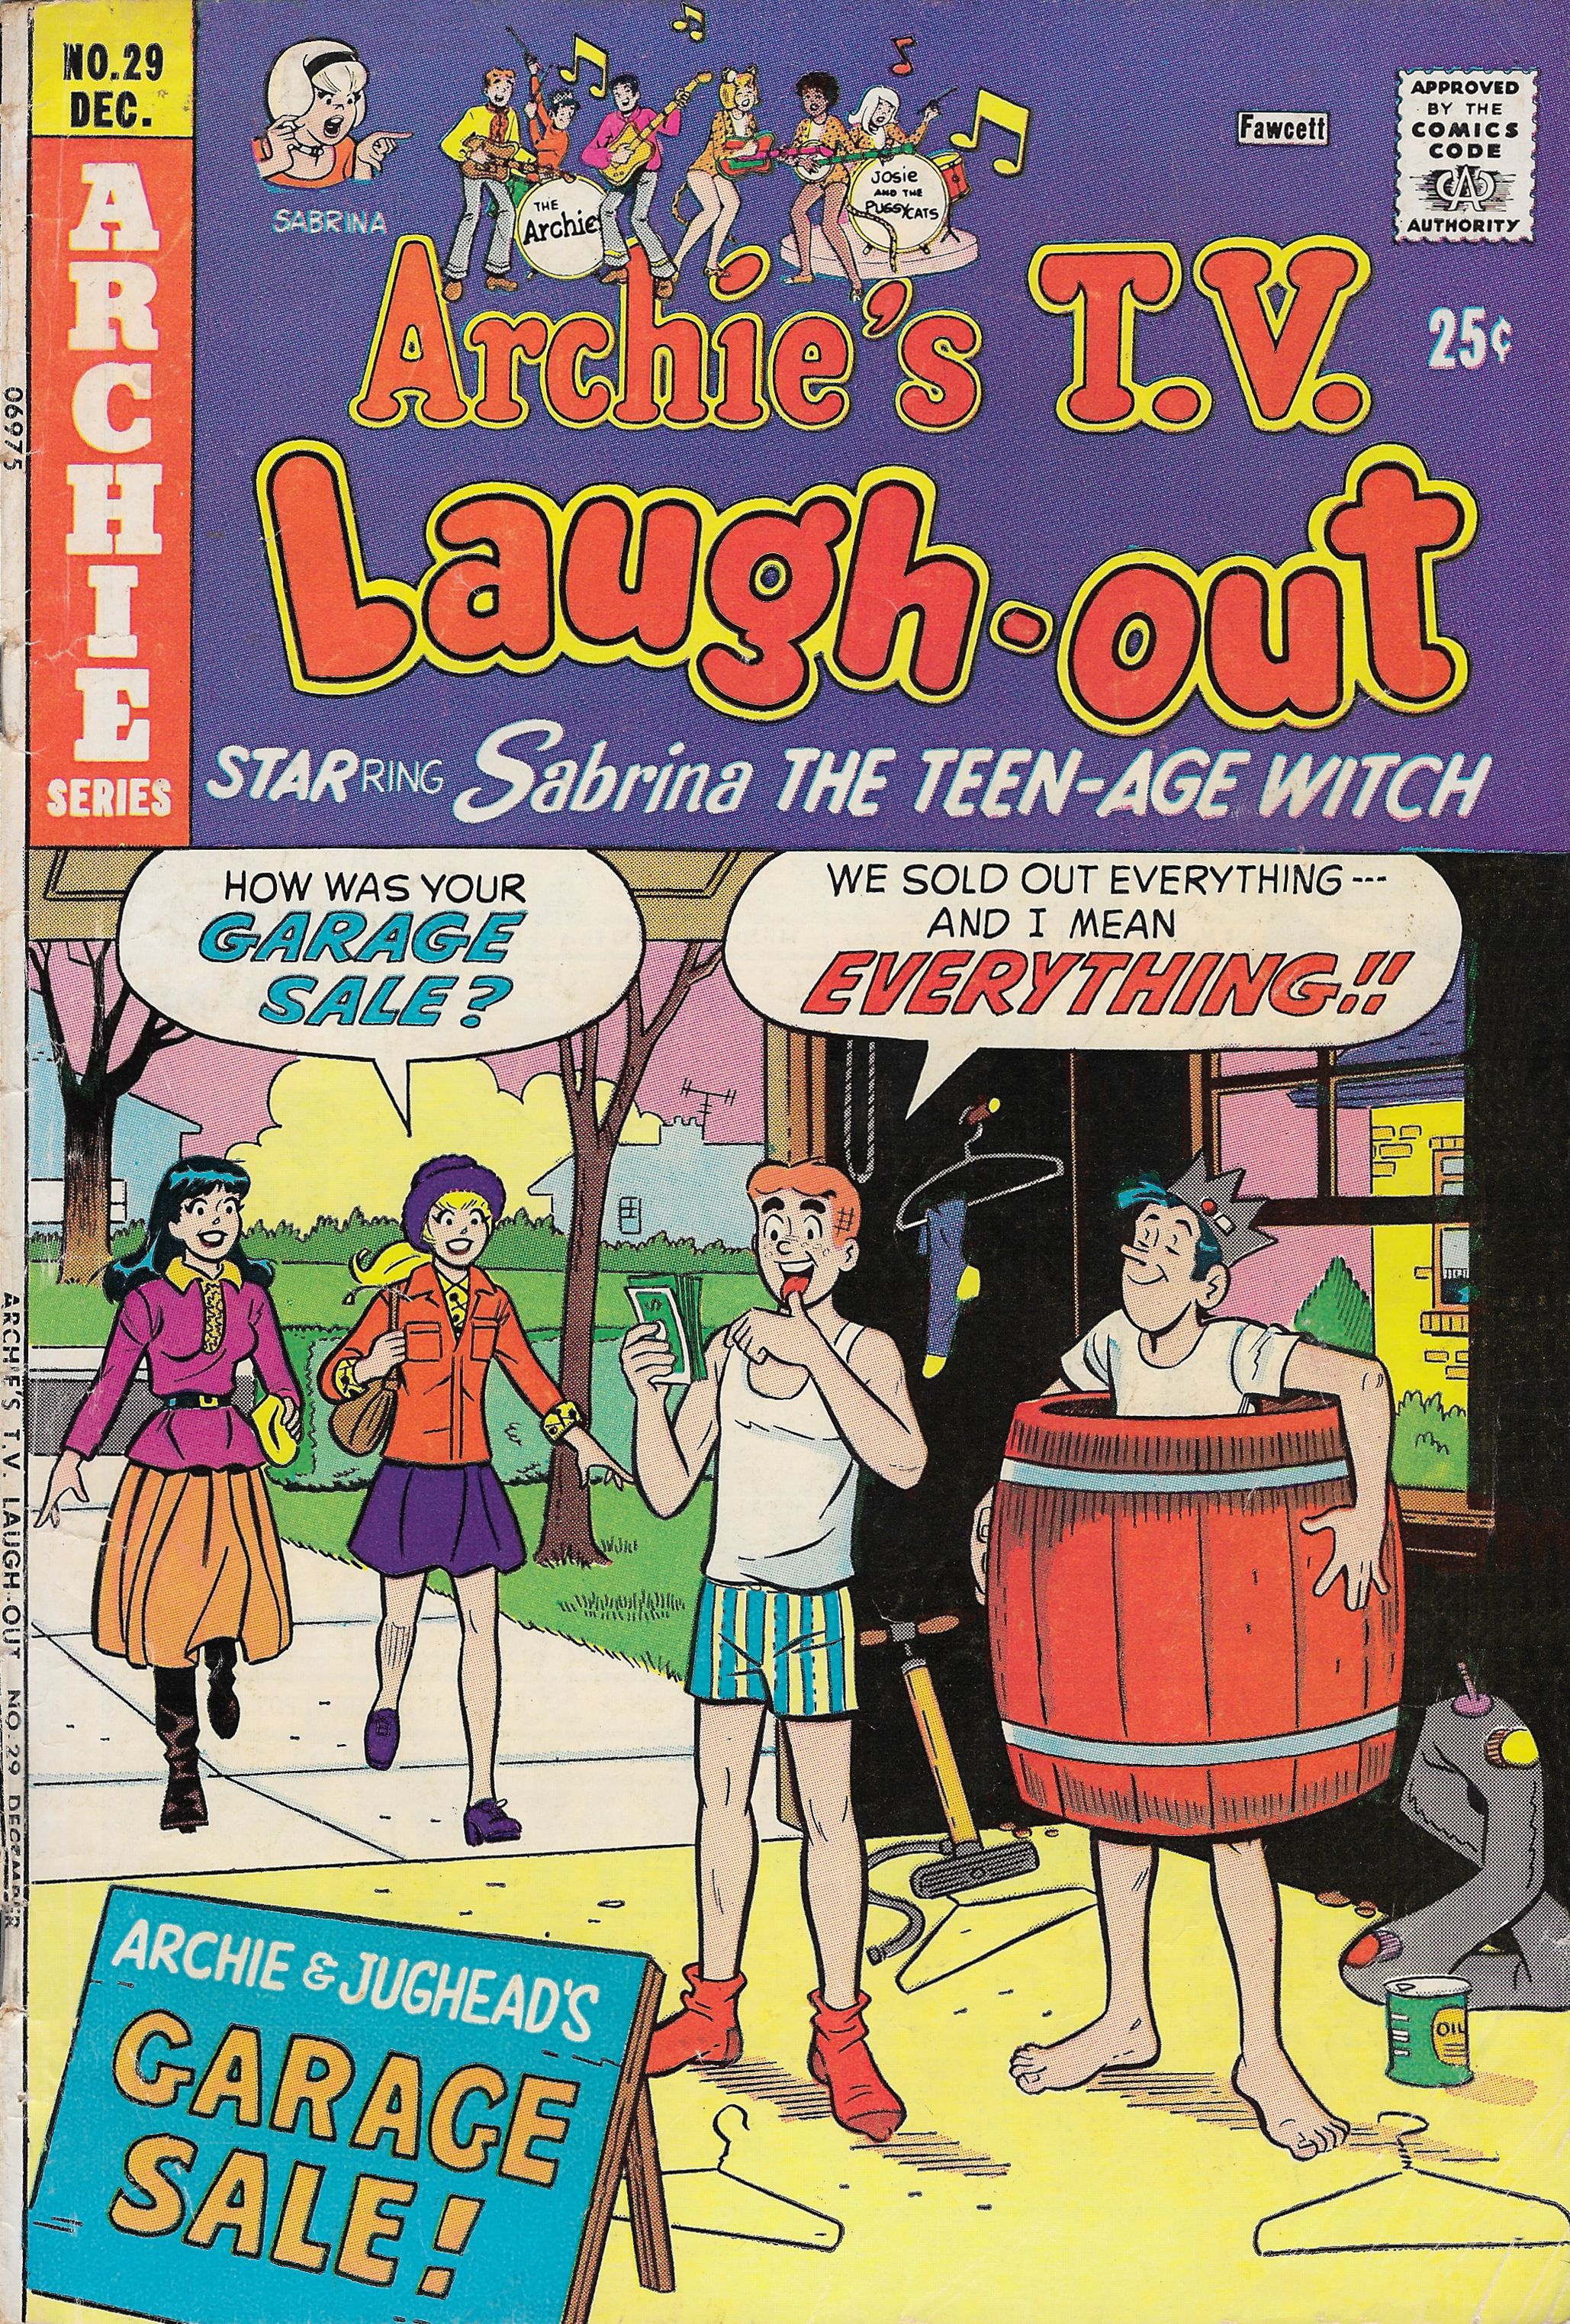 Read online Archie's TV Laugh-Out comic -  Issue #29 - 1